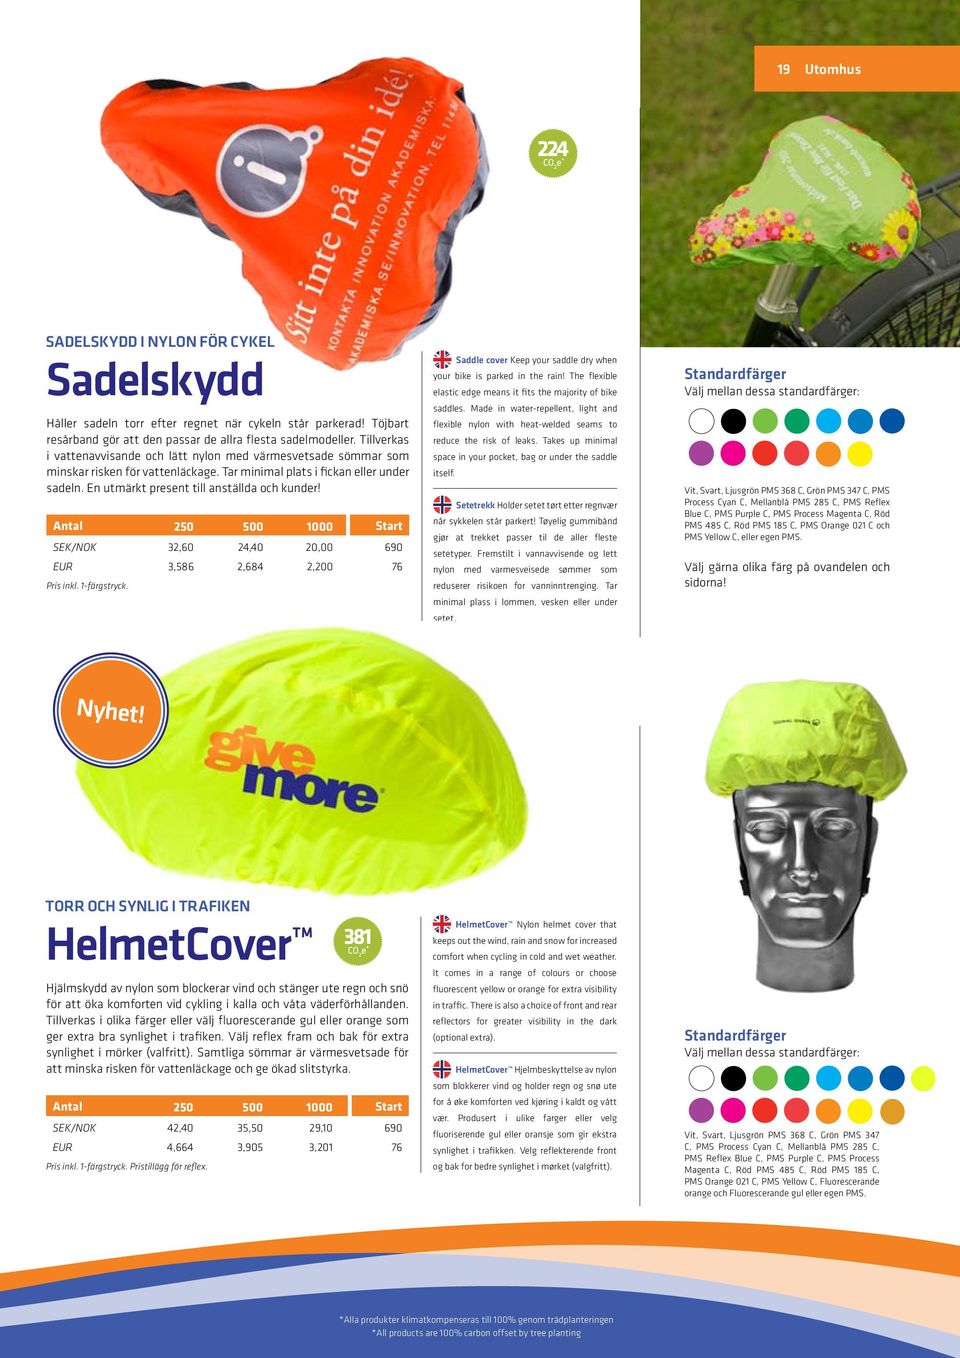 SEK/NOK 32,60 24,40 20,00 690 EUR 3,586 2,684 2,200 76 Saddle cover Keep your saddle dry when your bike is parked in the rain! The flexible elastic edge means it fits the majority of bike saddles.